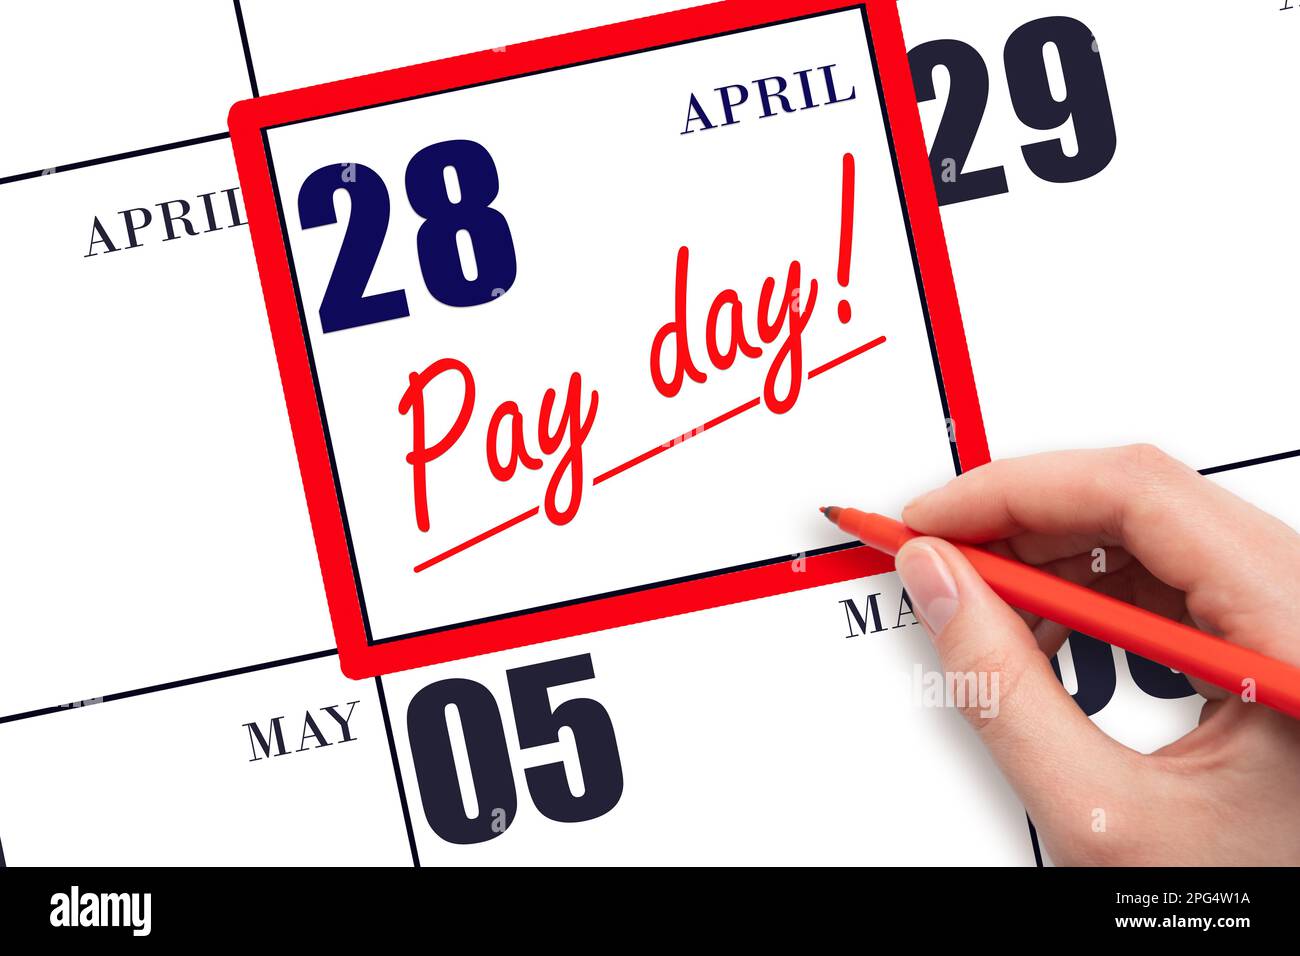 28th day of April. Hand writing text PAY DATE on calendar date April 28 and underline it. Payment due date. Reminder concept of payment. Spring month, Stock Photo